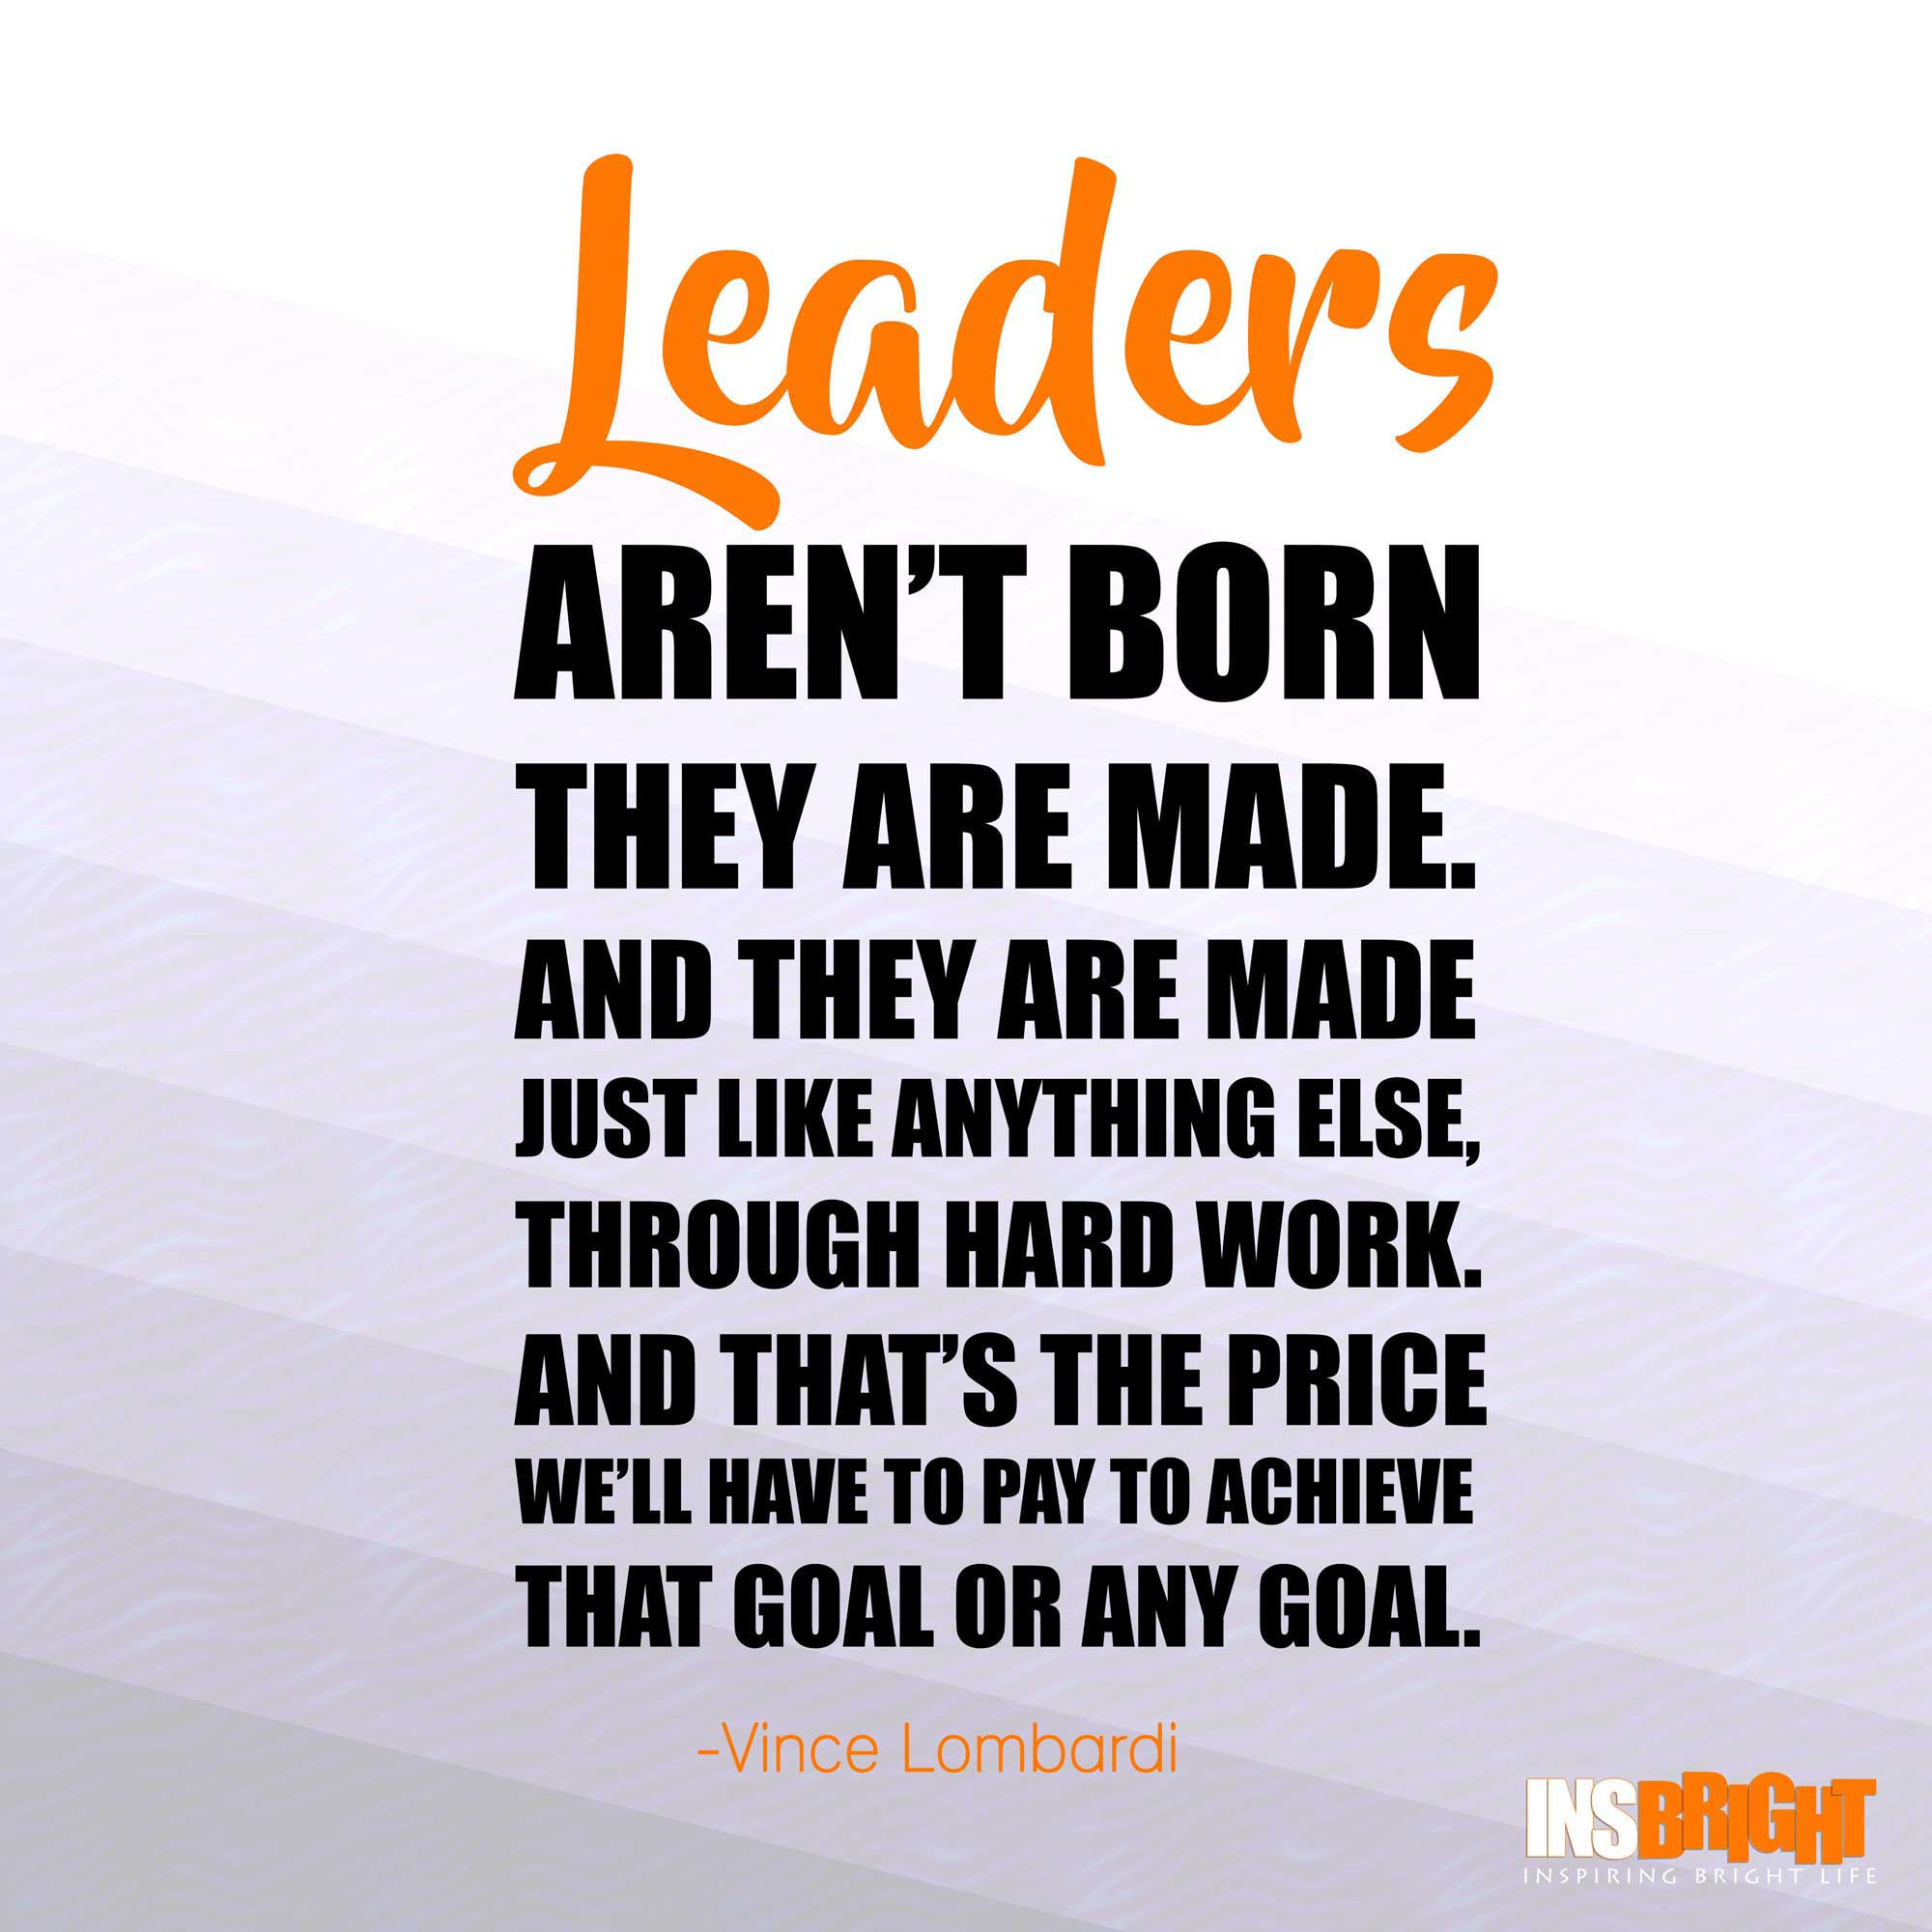 Leadership Quotes For Work
 100 Most Inspirational Leadership Quotes And Sayings